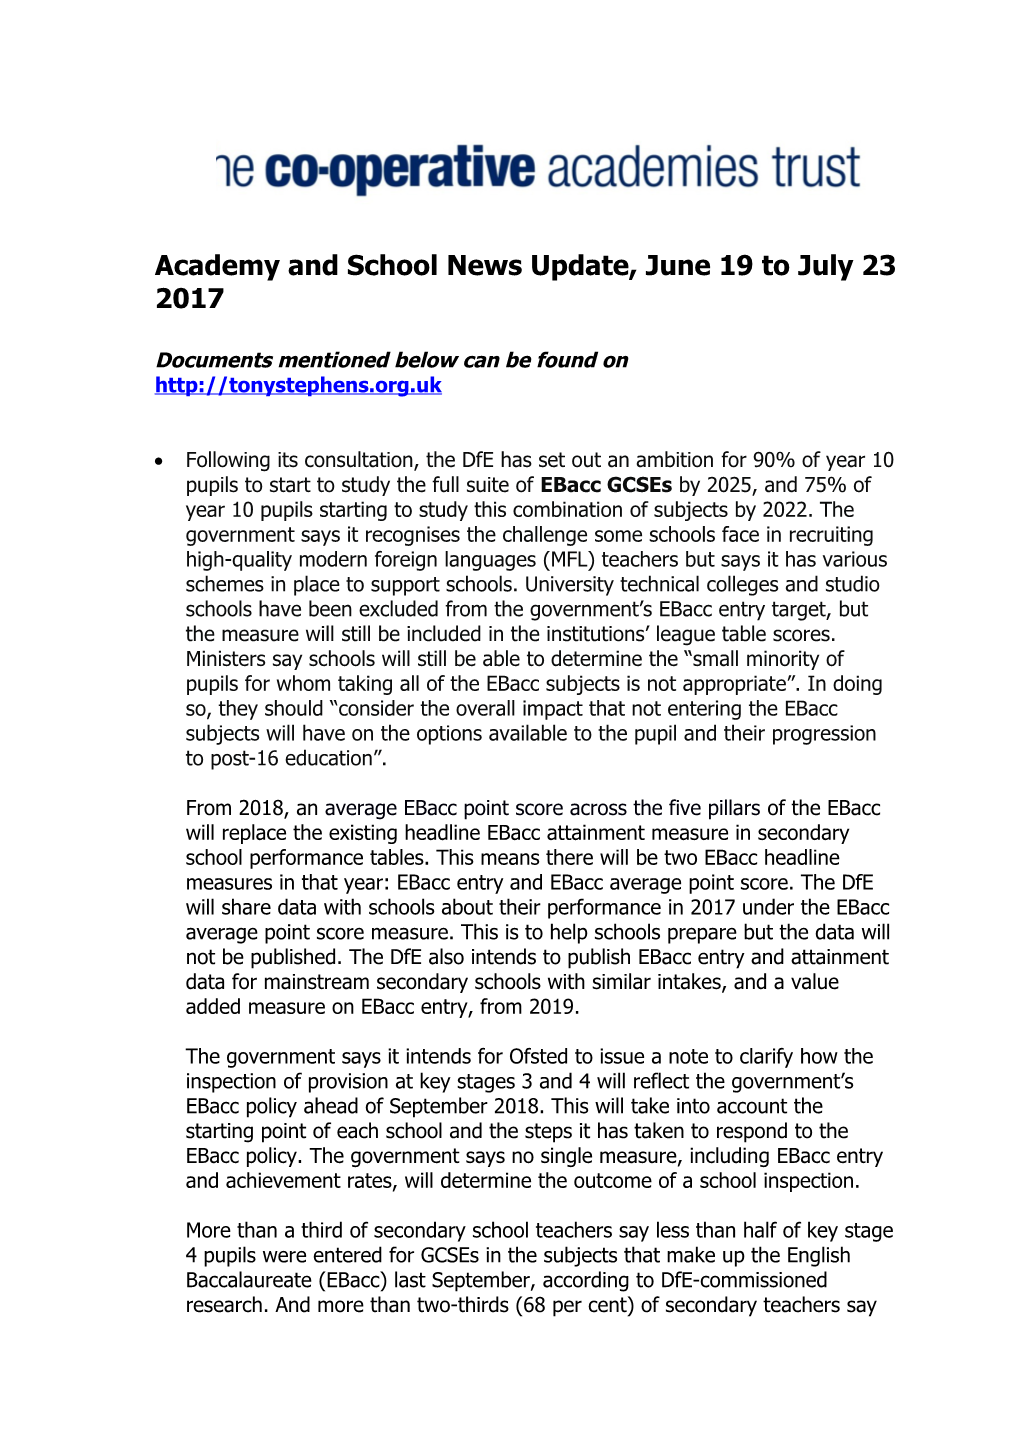 Academy and School News Update, June 19 to July 23 2017